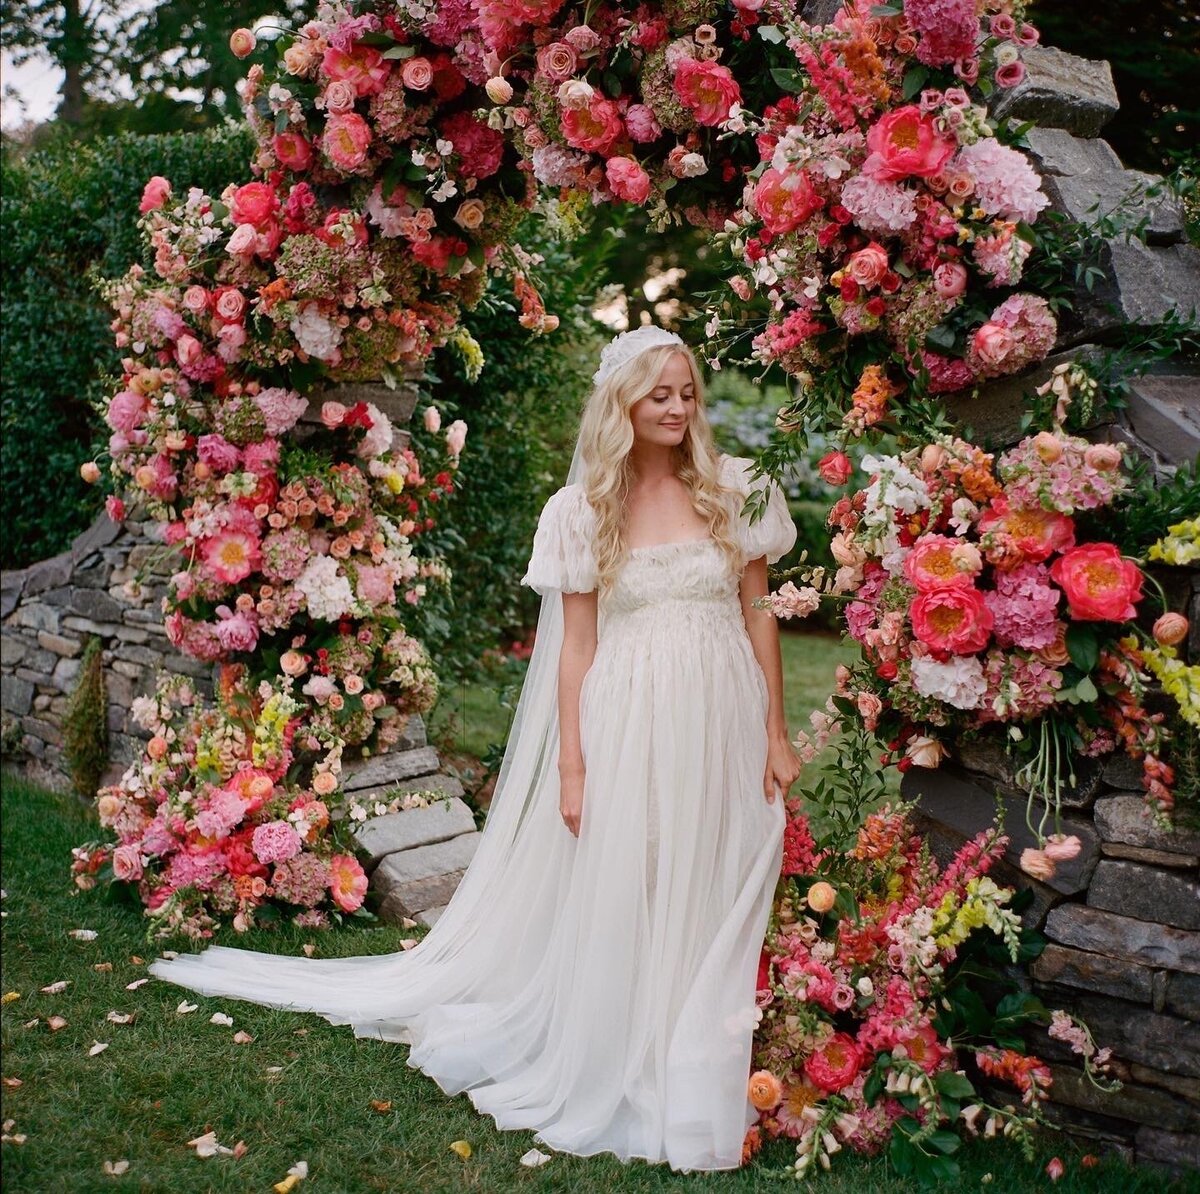 erica-renee-beauty-hair-and-makeup-duo-traveling-team-Newport-Harling-Ross-getting-ready-private-home-wedding-nyc-cool-bride-fashion-stylish-duo-long-blond-curls-cap-veil-cap-sleeves-natural-makeup-pre-raphaelites-lush-flowers